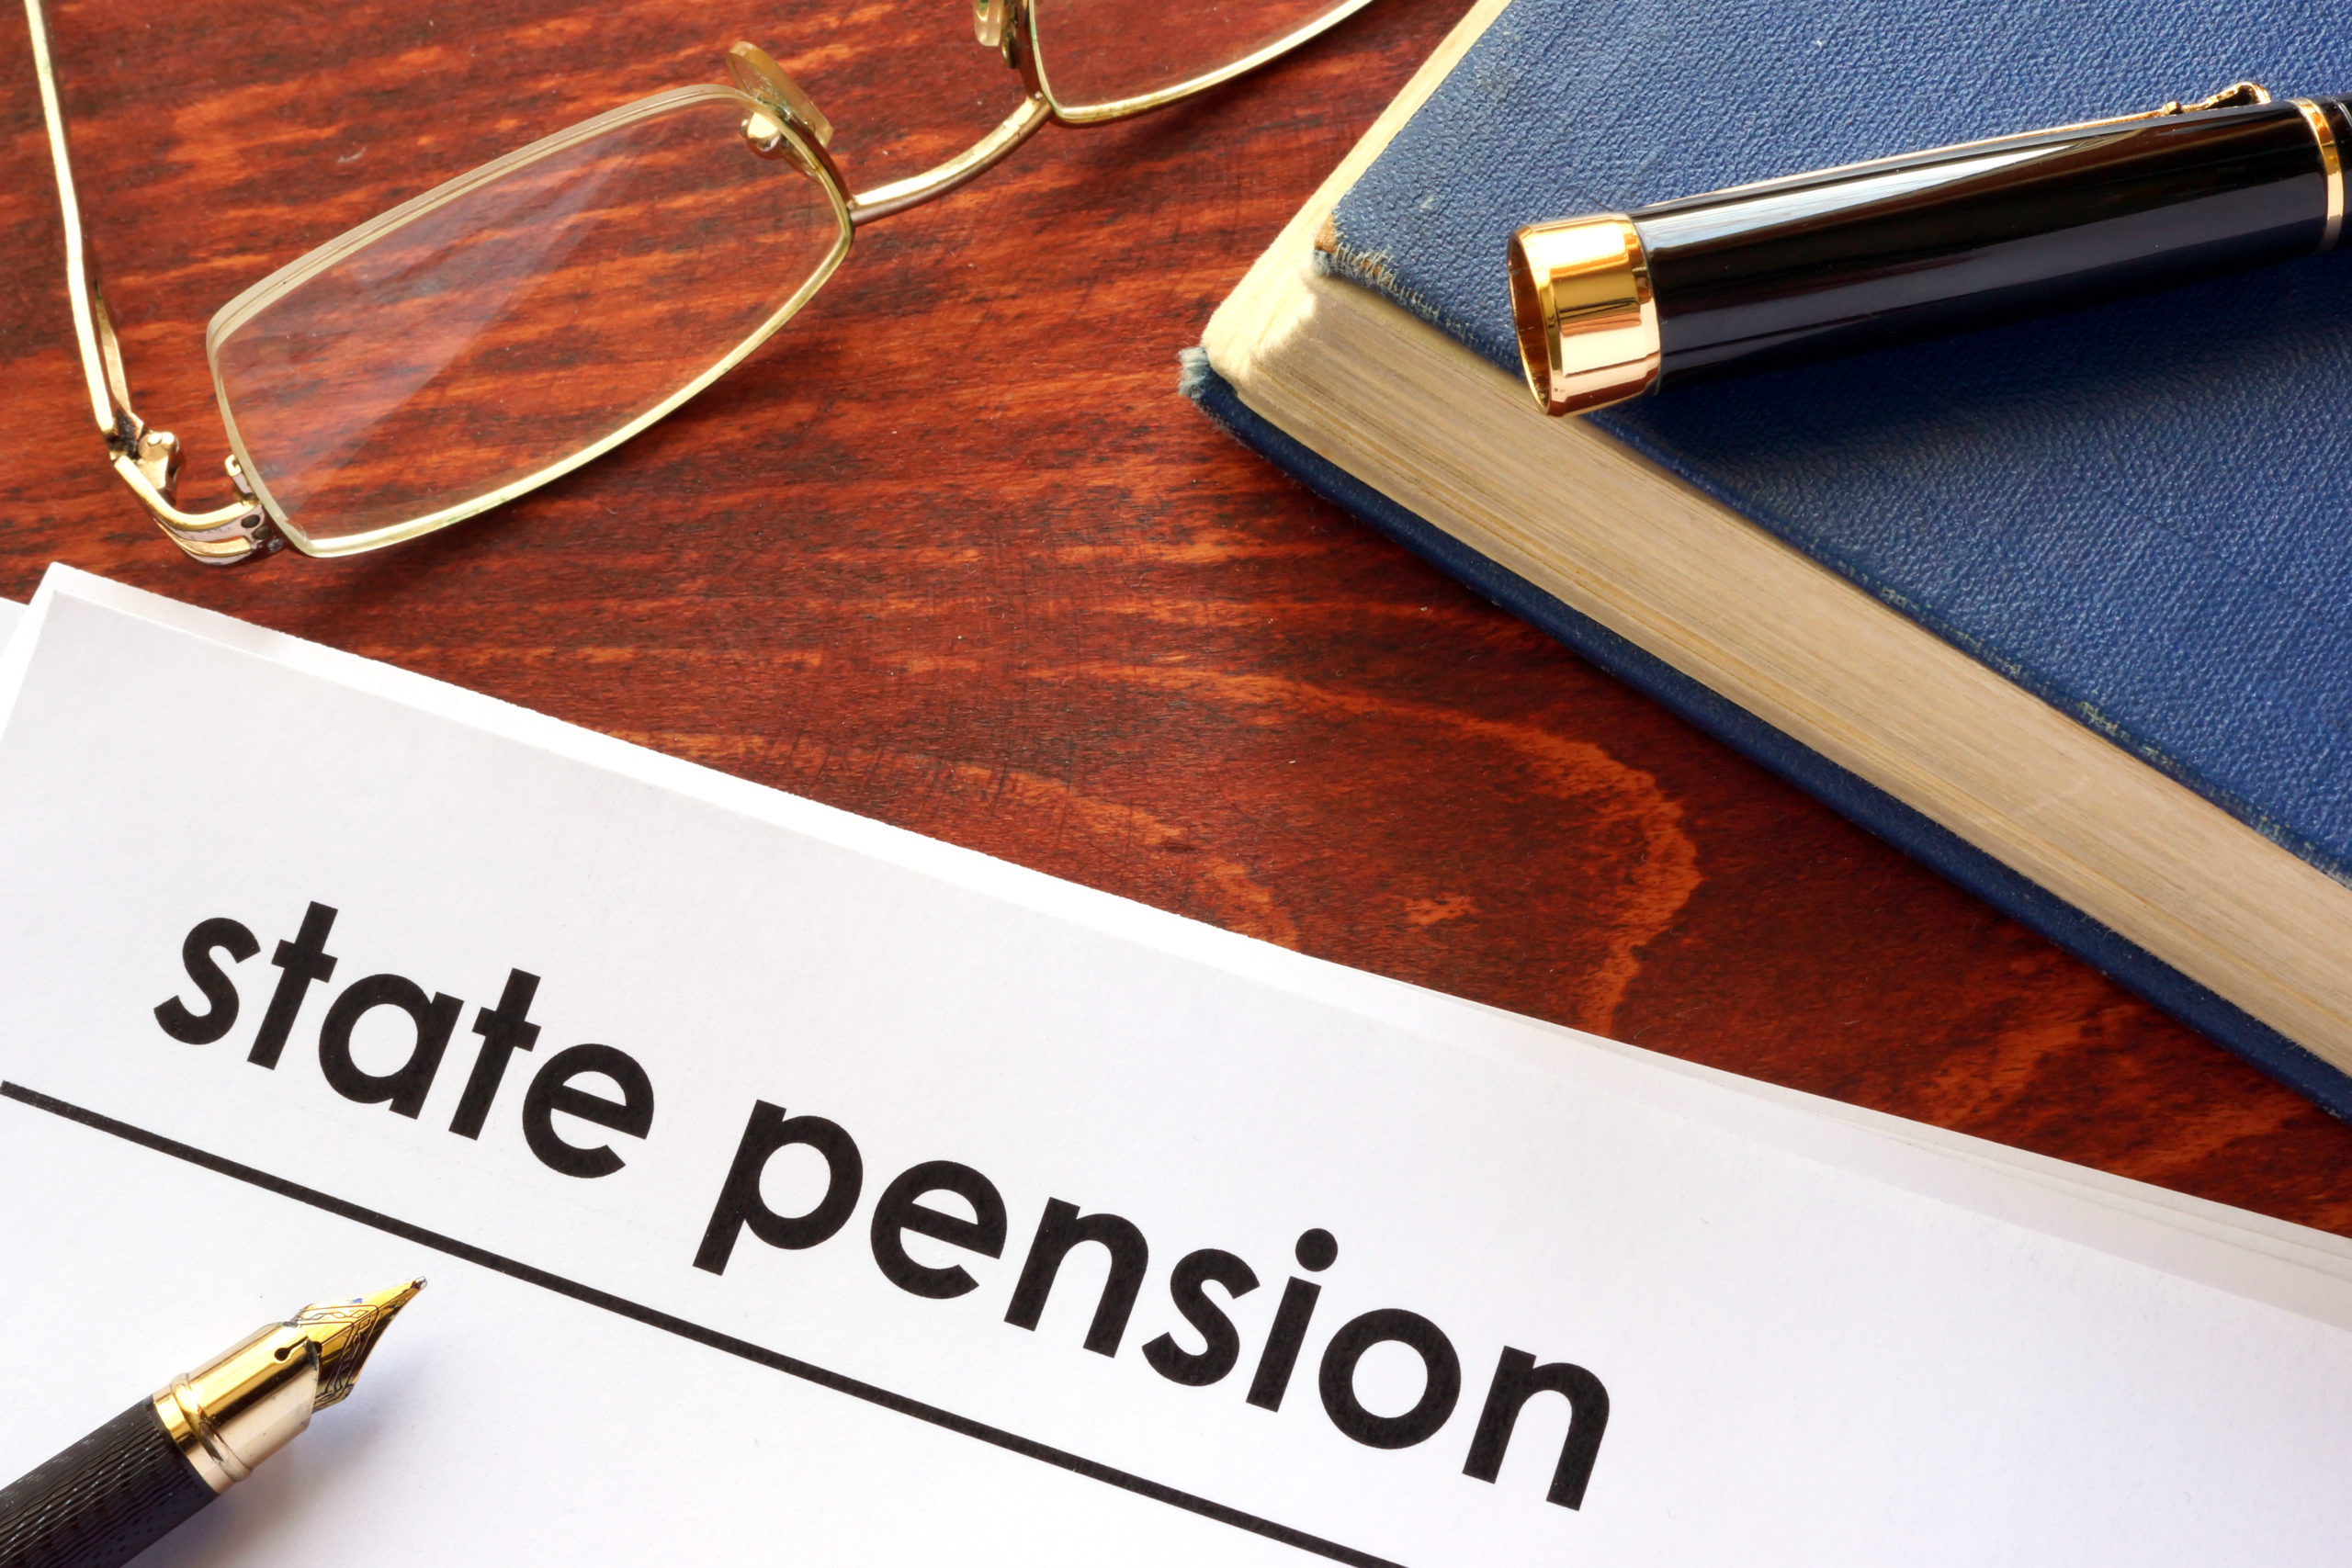 Pension Reform Newsletter: The Impact of COVID-19 on Pension Plans, the Need for Resiliency to Market Turbulence, and More